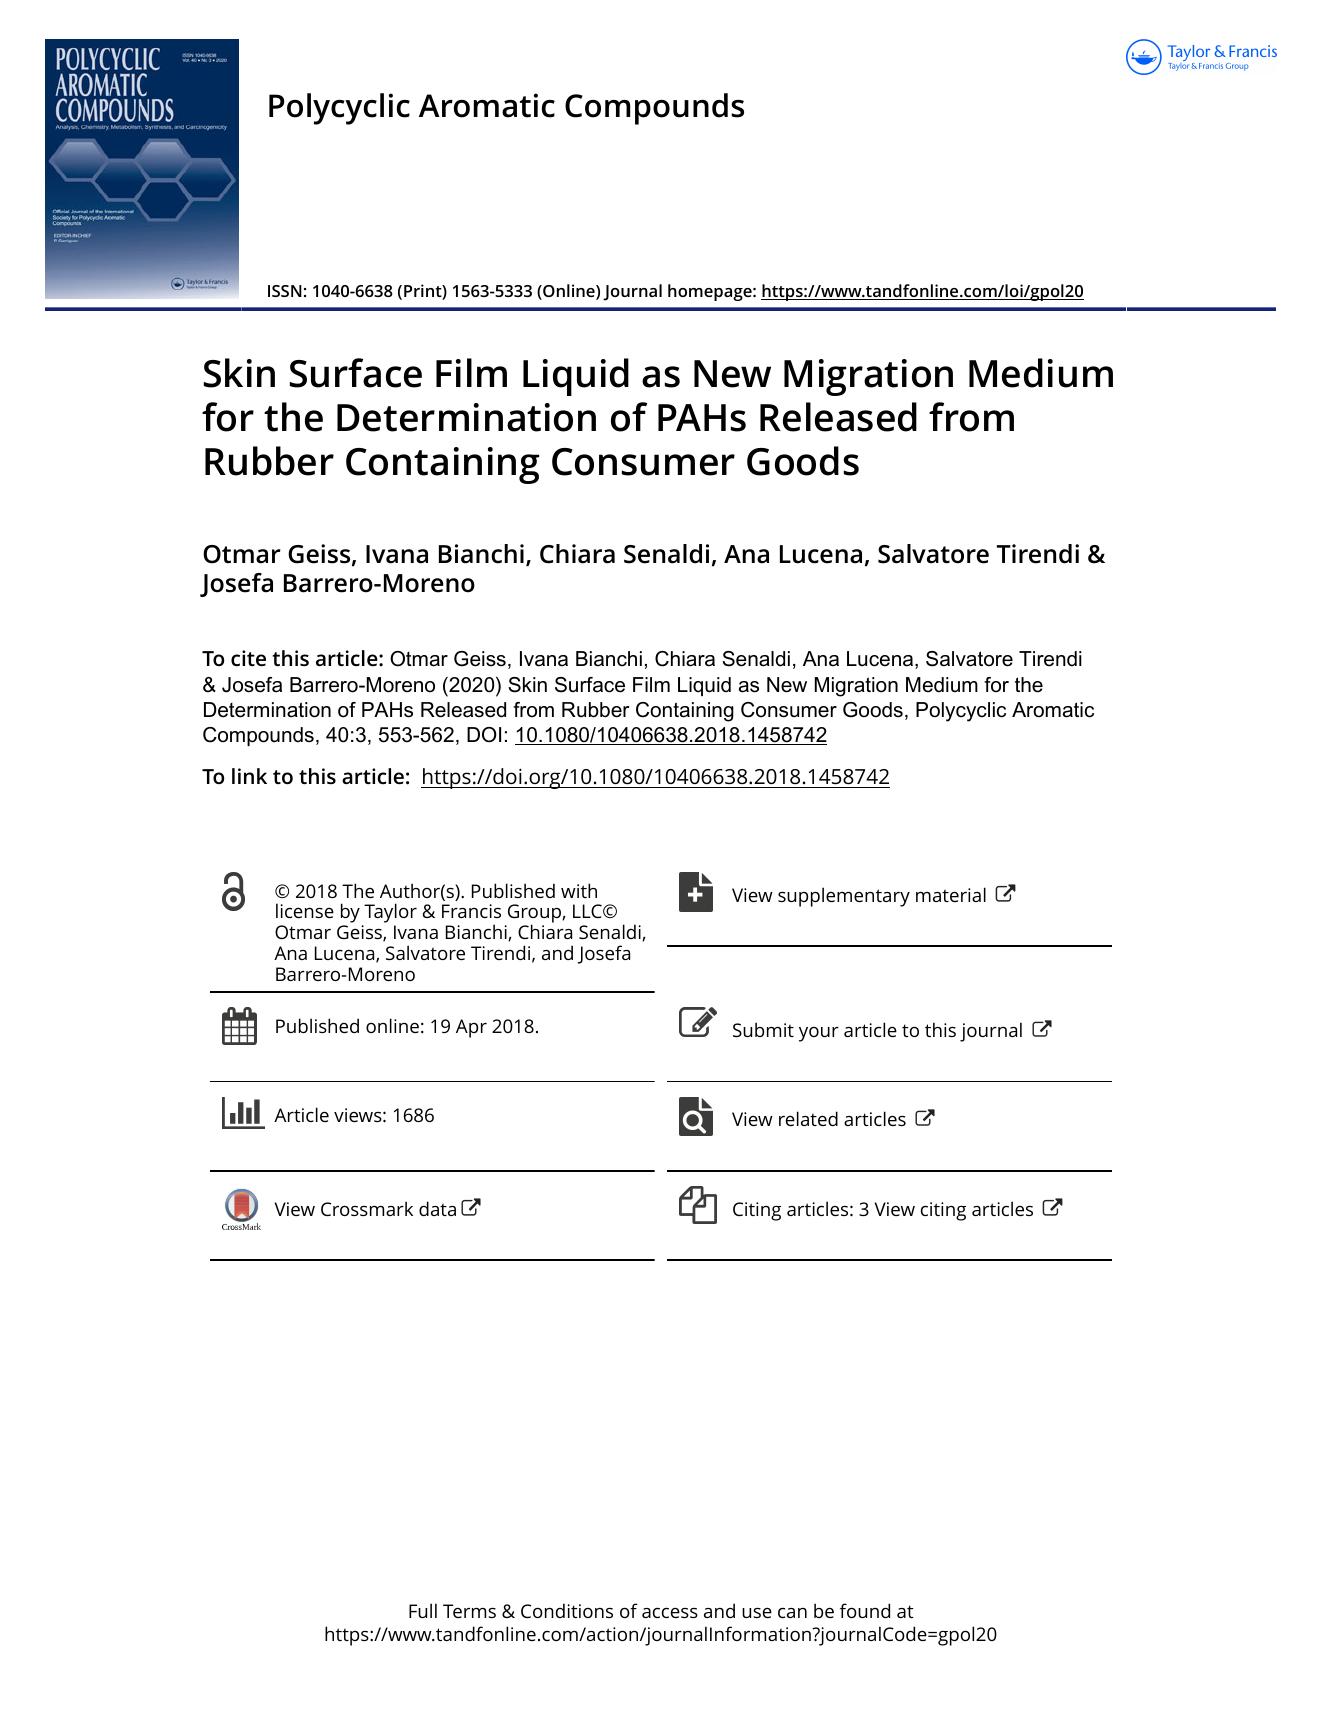 Skin Surface Film Liquid as New Migration Medium for the Determination of PAHs Released from Rubber Containing Consumer Goods by unknow